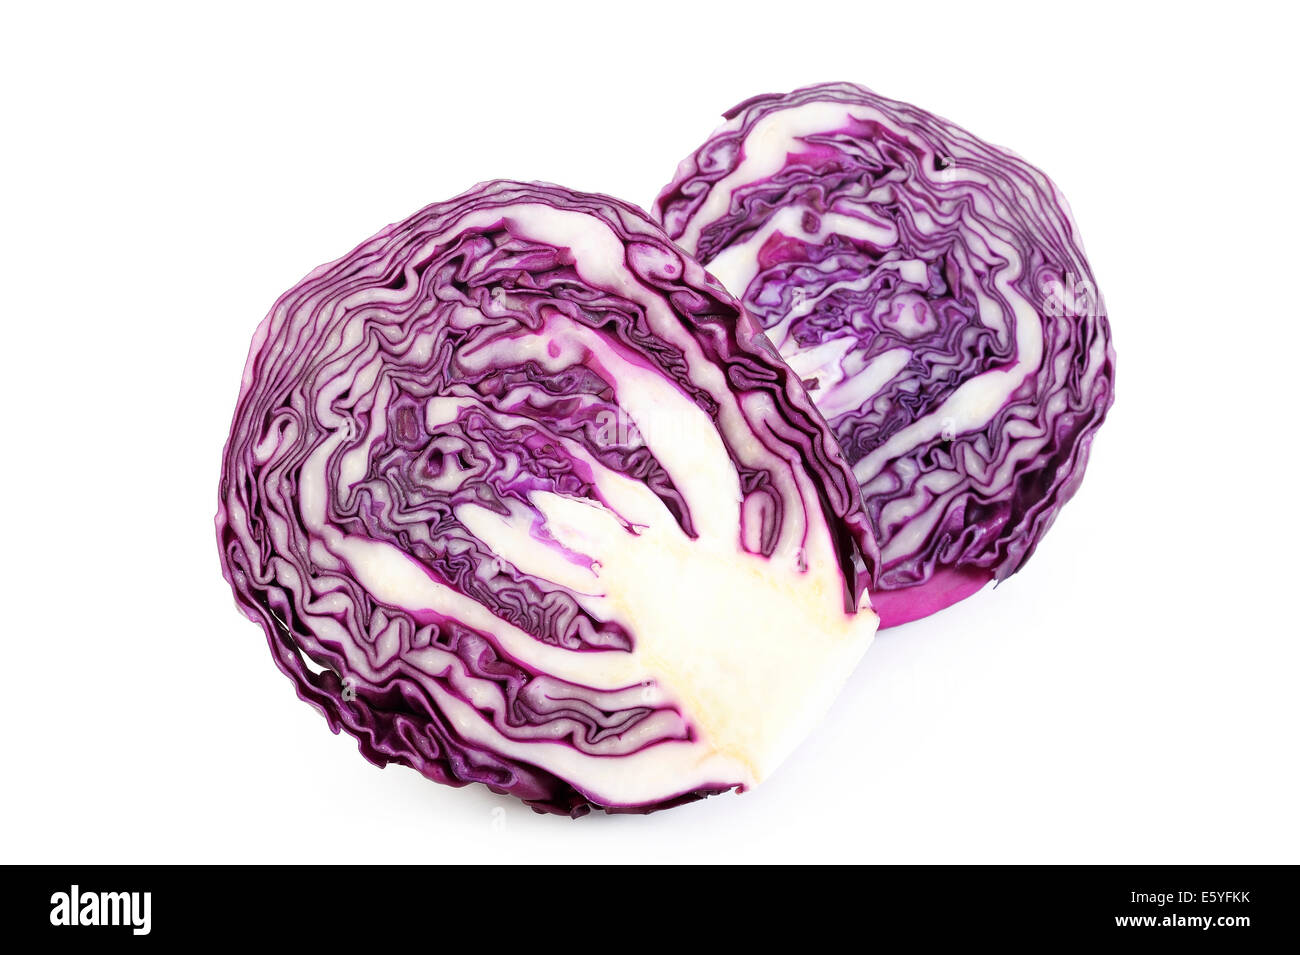 red cabbage cut in half on white background Stock Photo